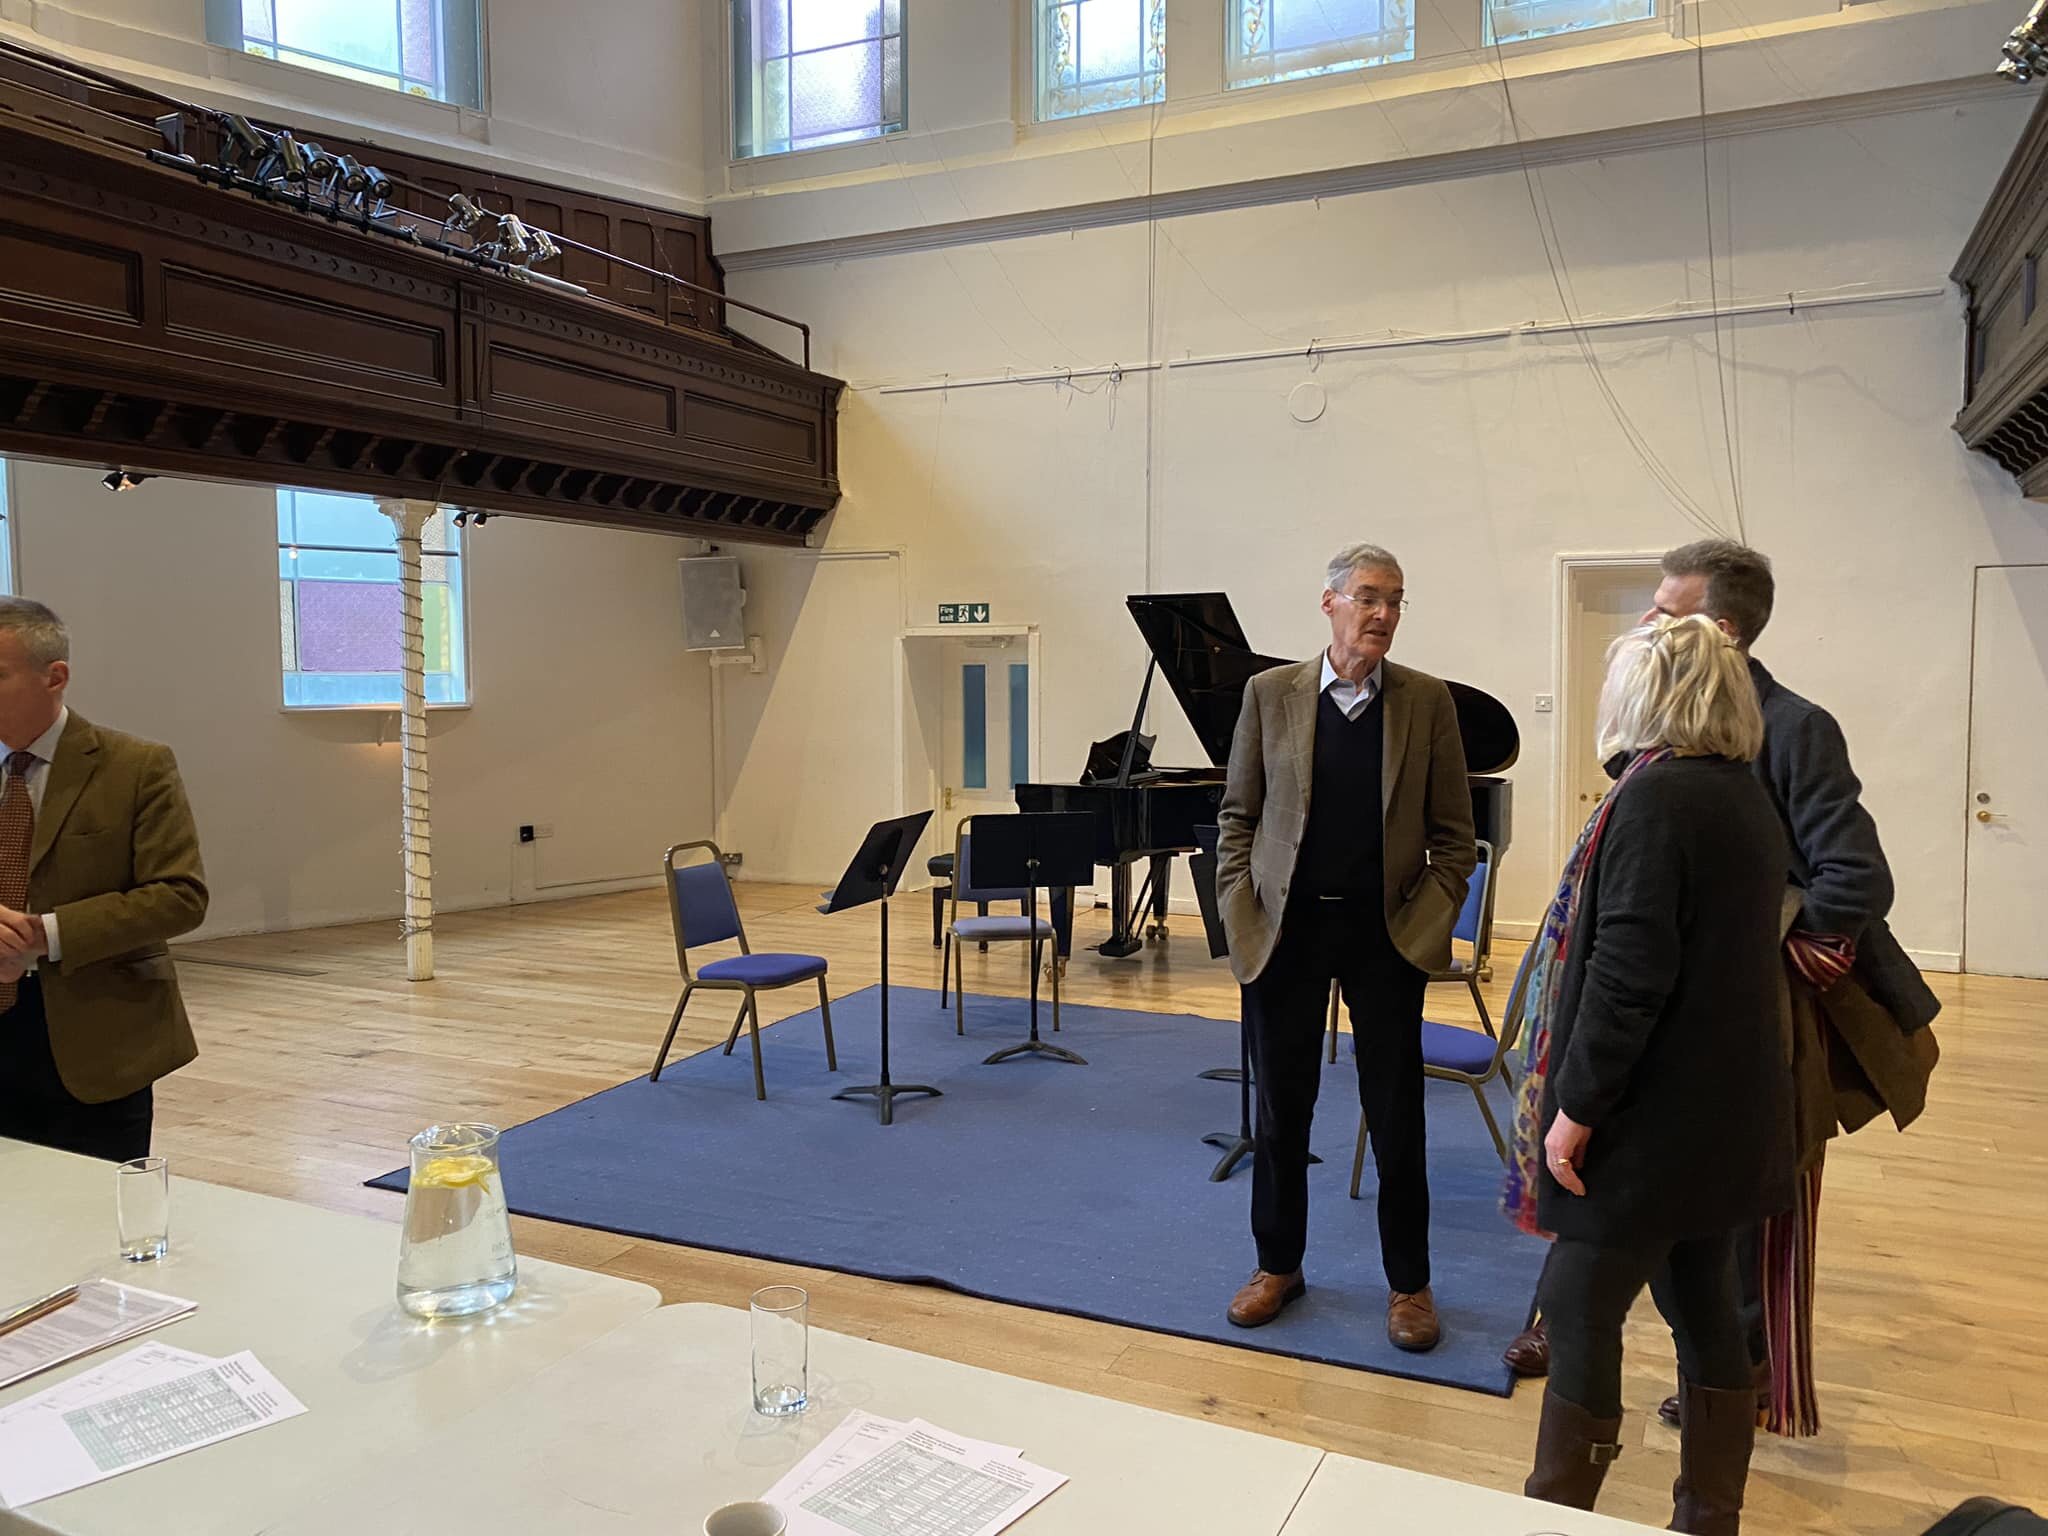 About to begin a day of Tillett Trust auditions (at the Amadeus Centre) with Roger Vignoles, Yvonne Minton and other lovely people. Always such a pleasure and delight&hellip;